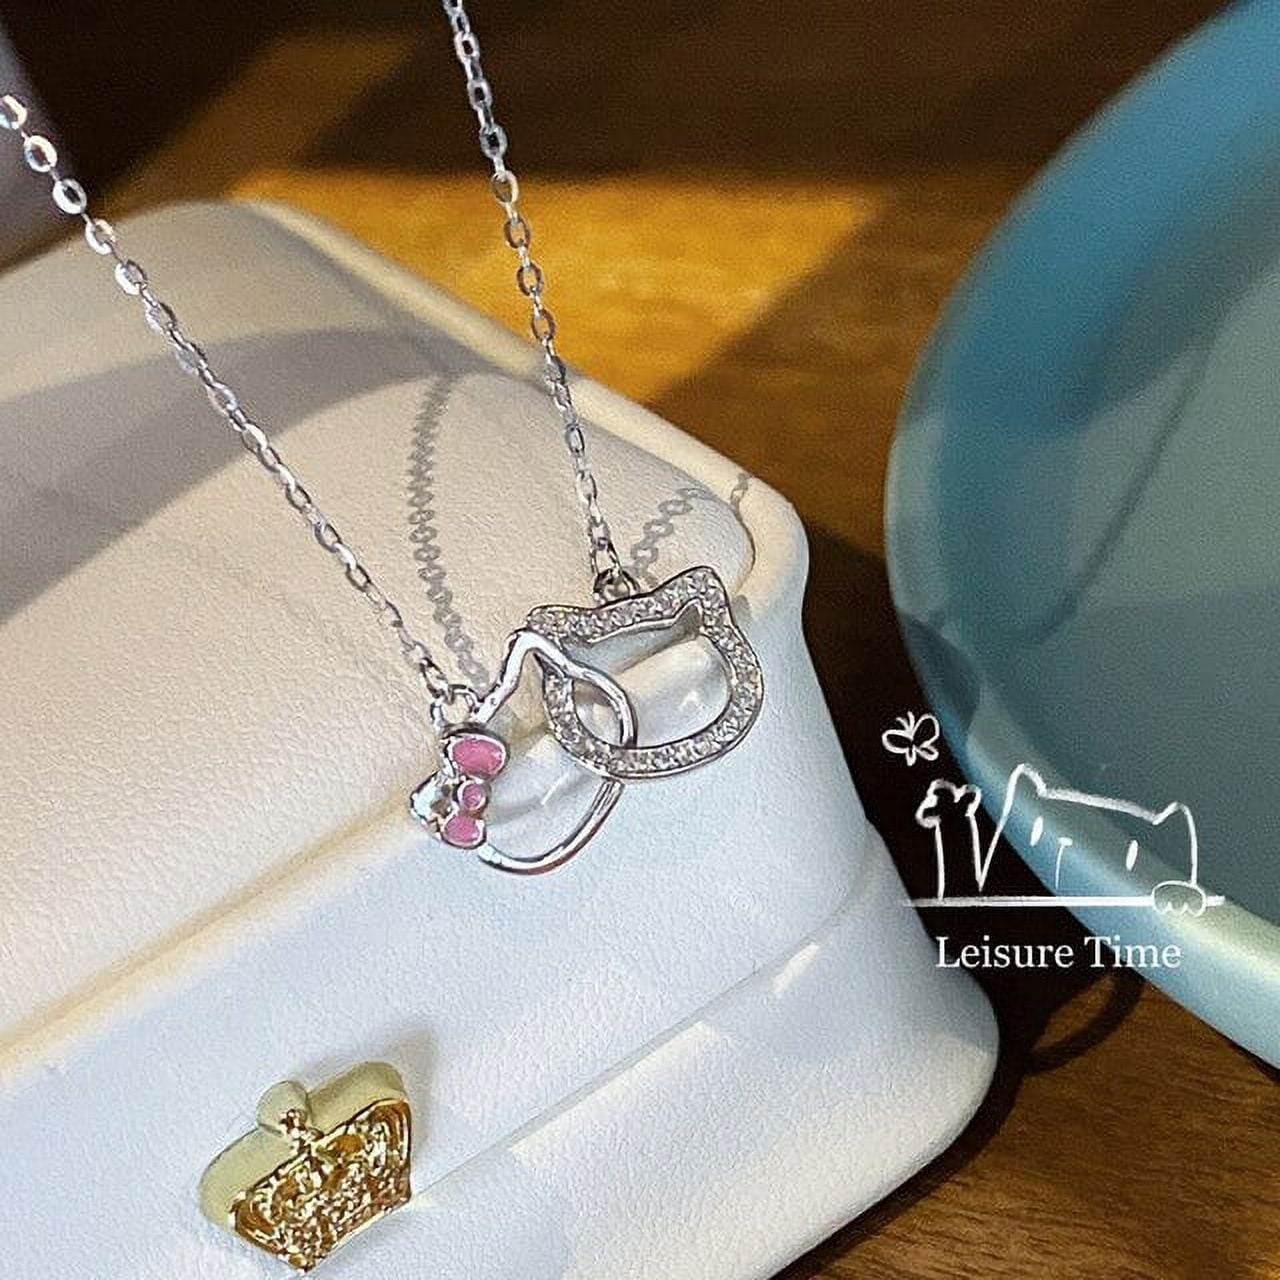 Y2k Hello Kitty Necklace Choker Chain Alloy Silver Crystals Female Bracelet  Pendant Sanrio Collar Women Jewelry Gift Girls Toy